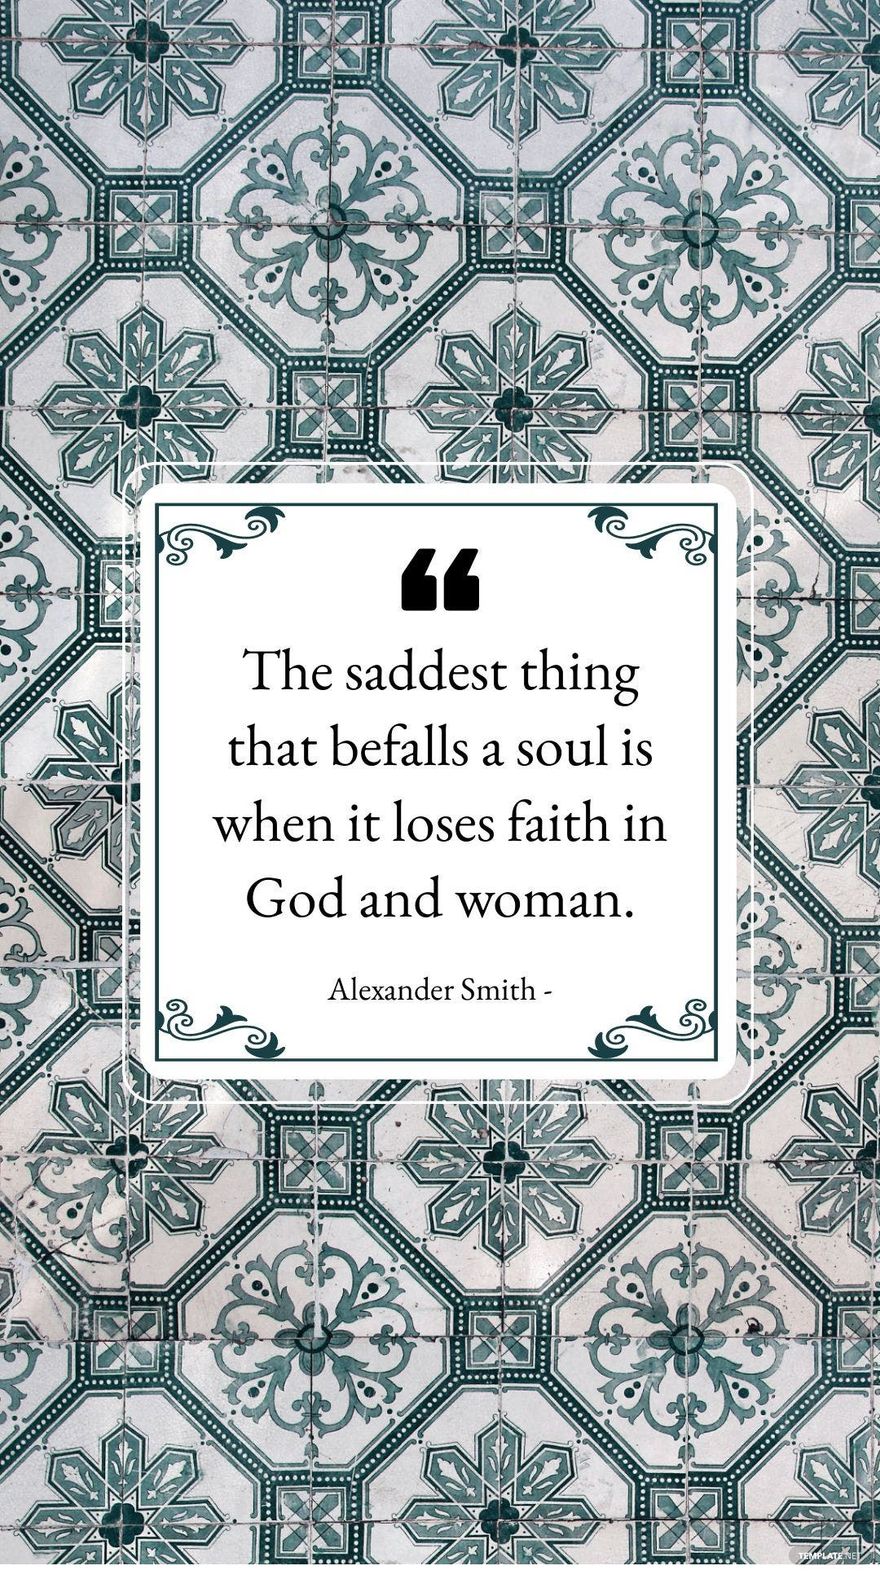 Alexander Smith - The saddest thing that befalls a soul is when it loses faith in God and woman.